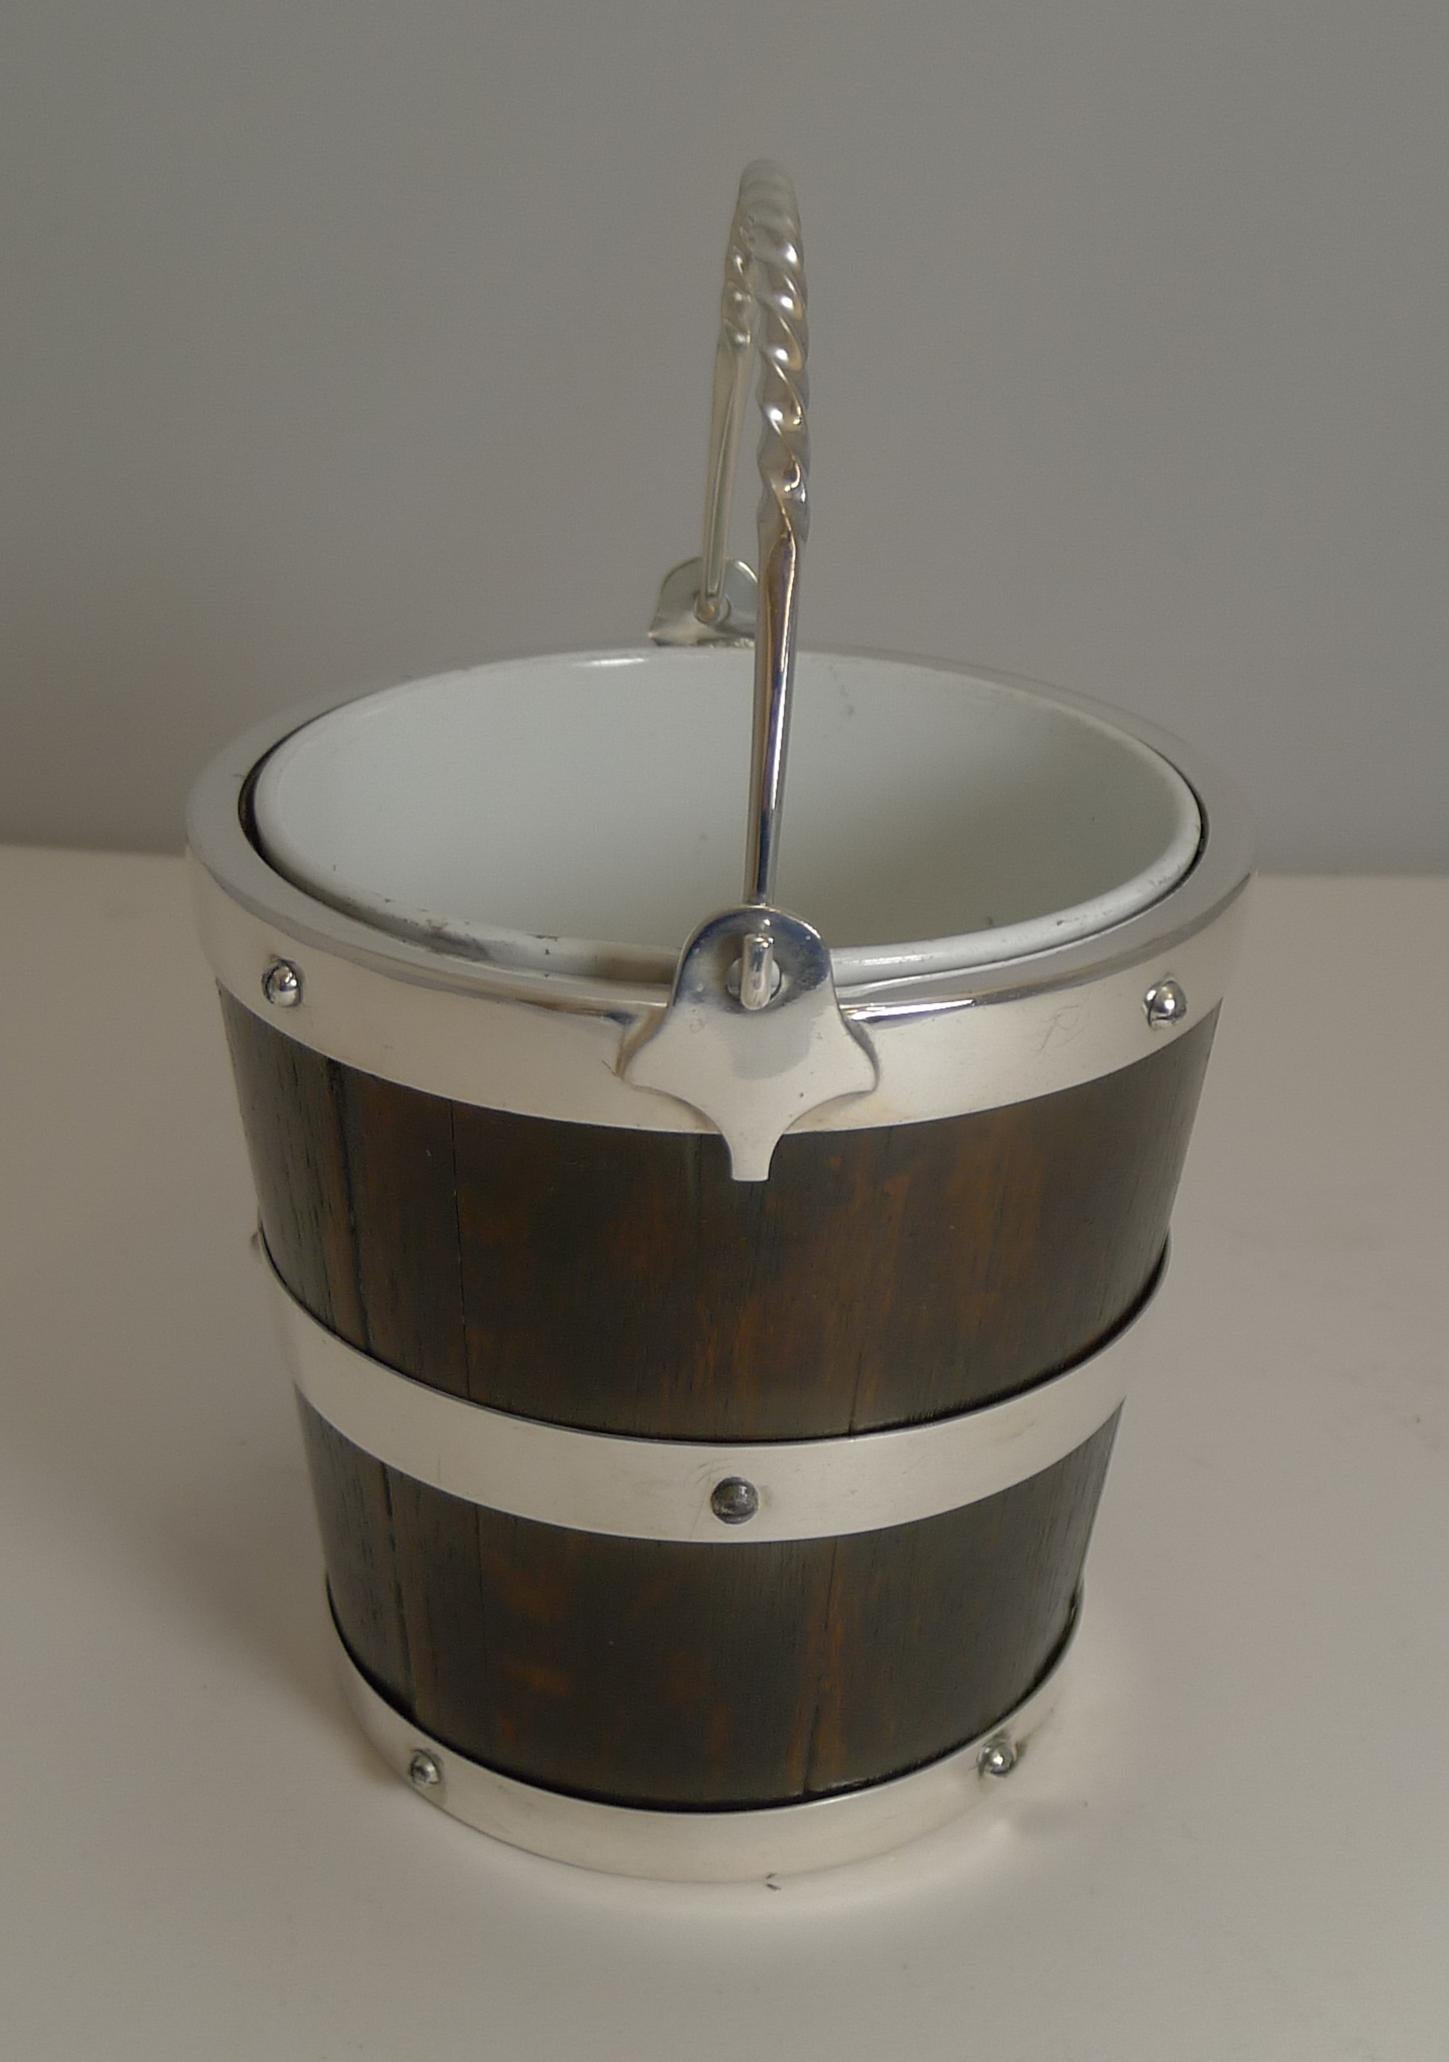 Rarely found and highly sought-after ice bucket in English Oak in the form of a coopered bucket bound with silverplated banding with quality screwed construction.

The interior is lucky enough to have retained it's original creamware liner, and